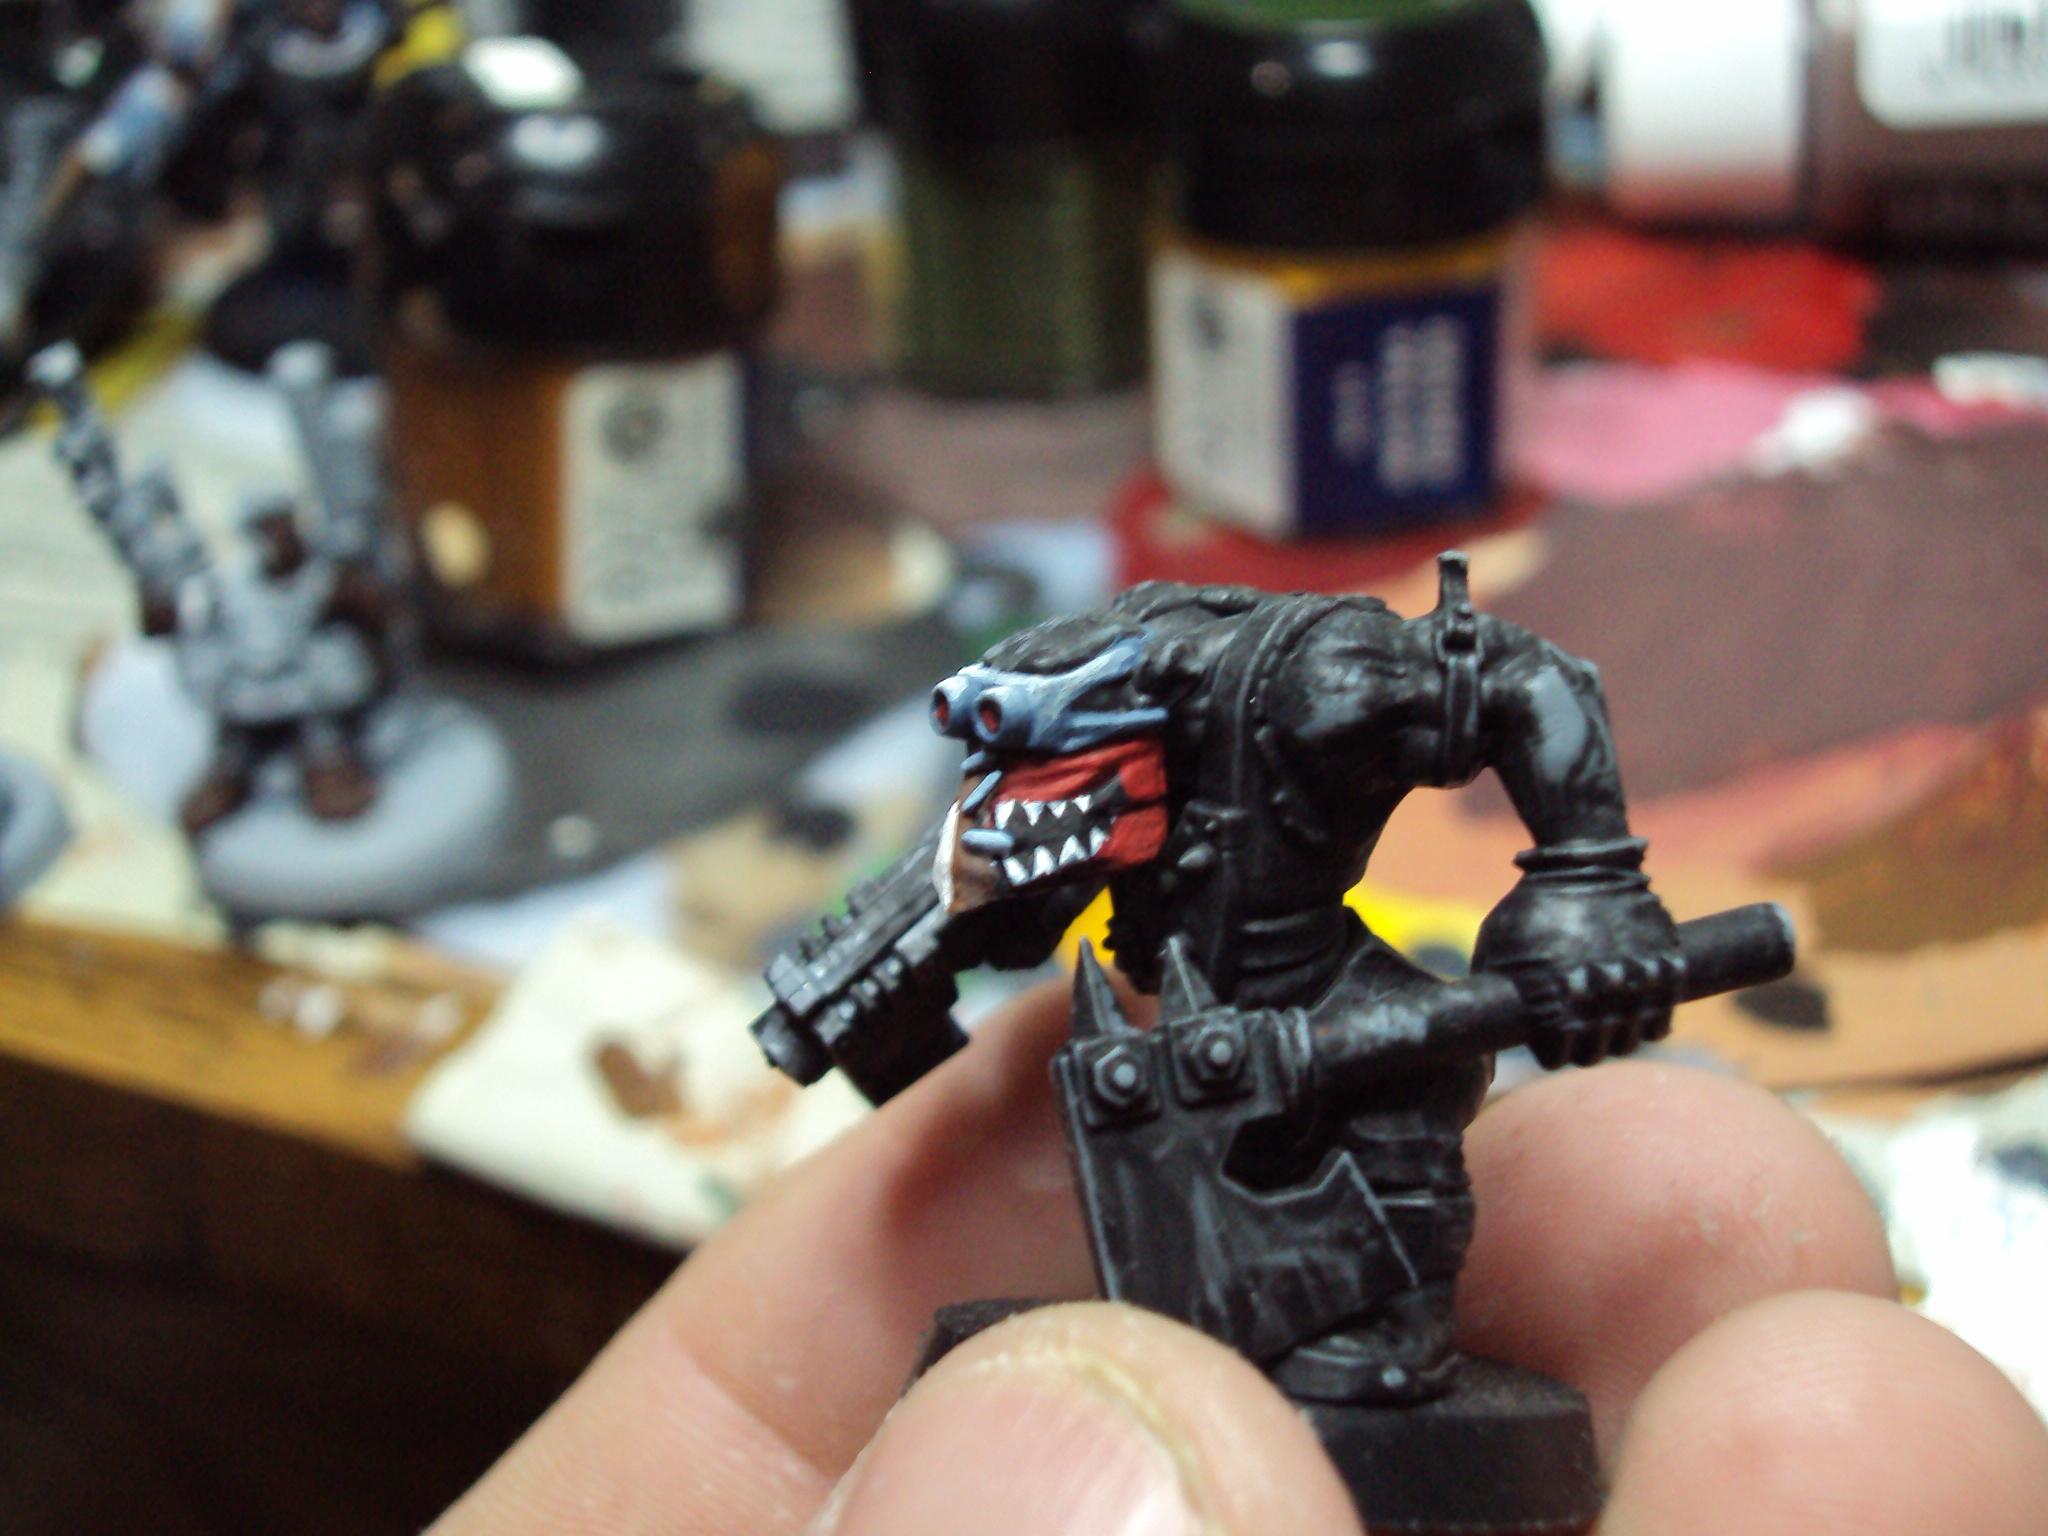 May be a part of the ork bosses retinue, havent decided